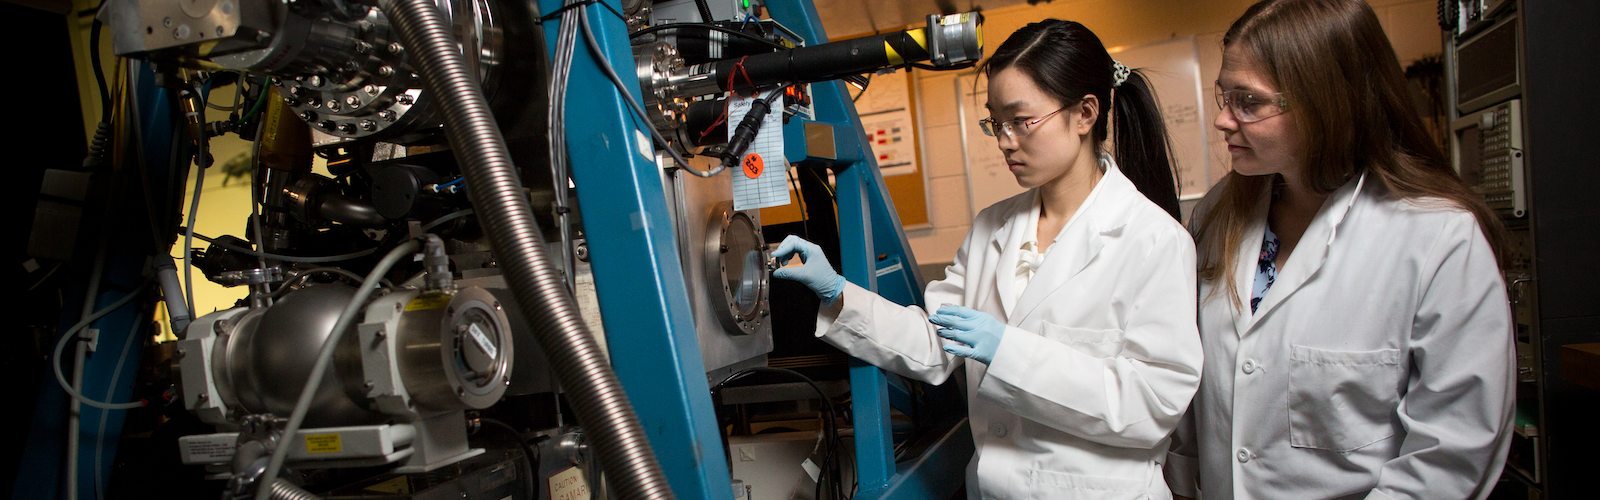 Two students in lab coats closely examine a machine 